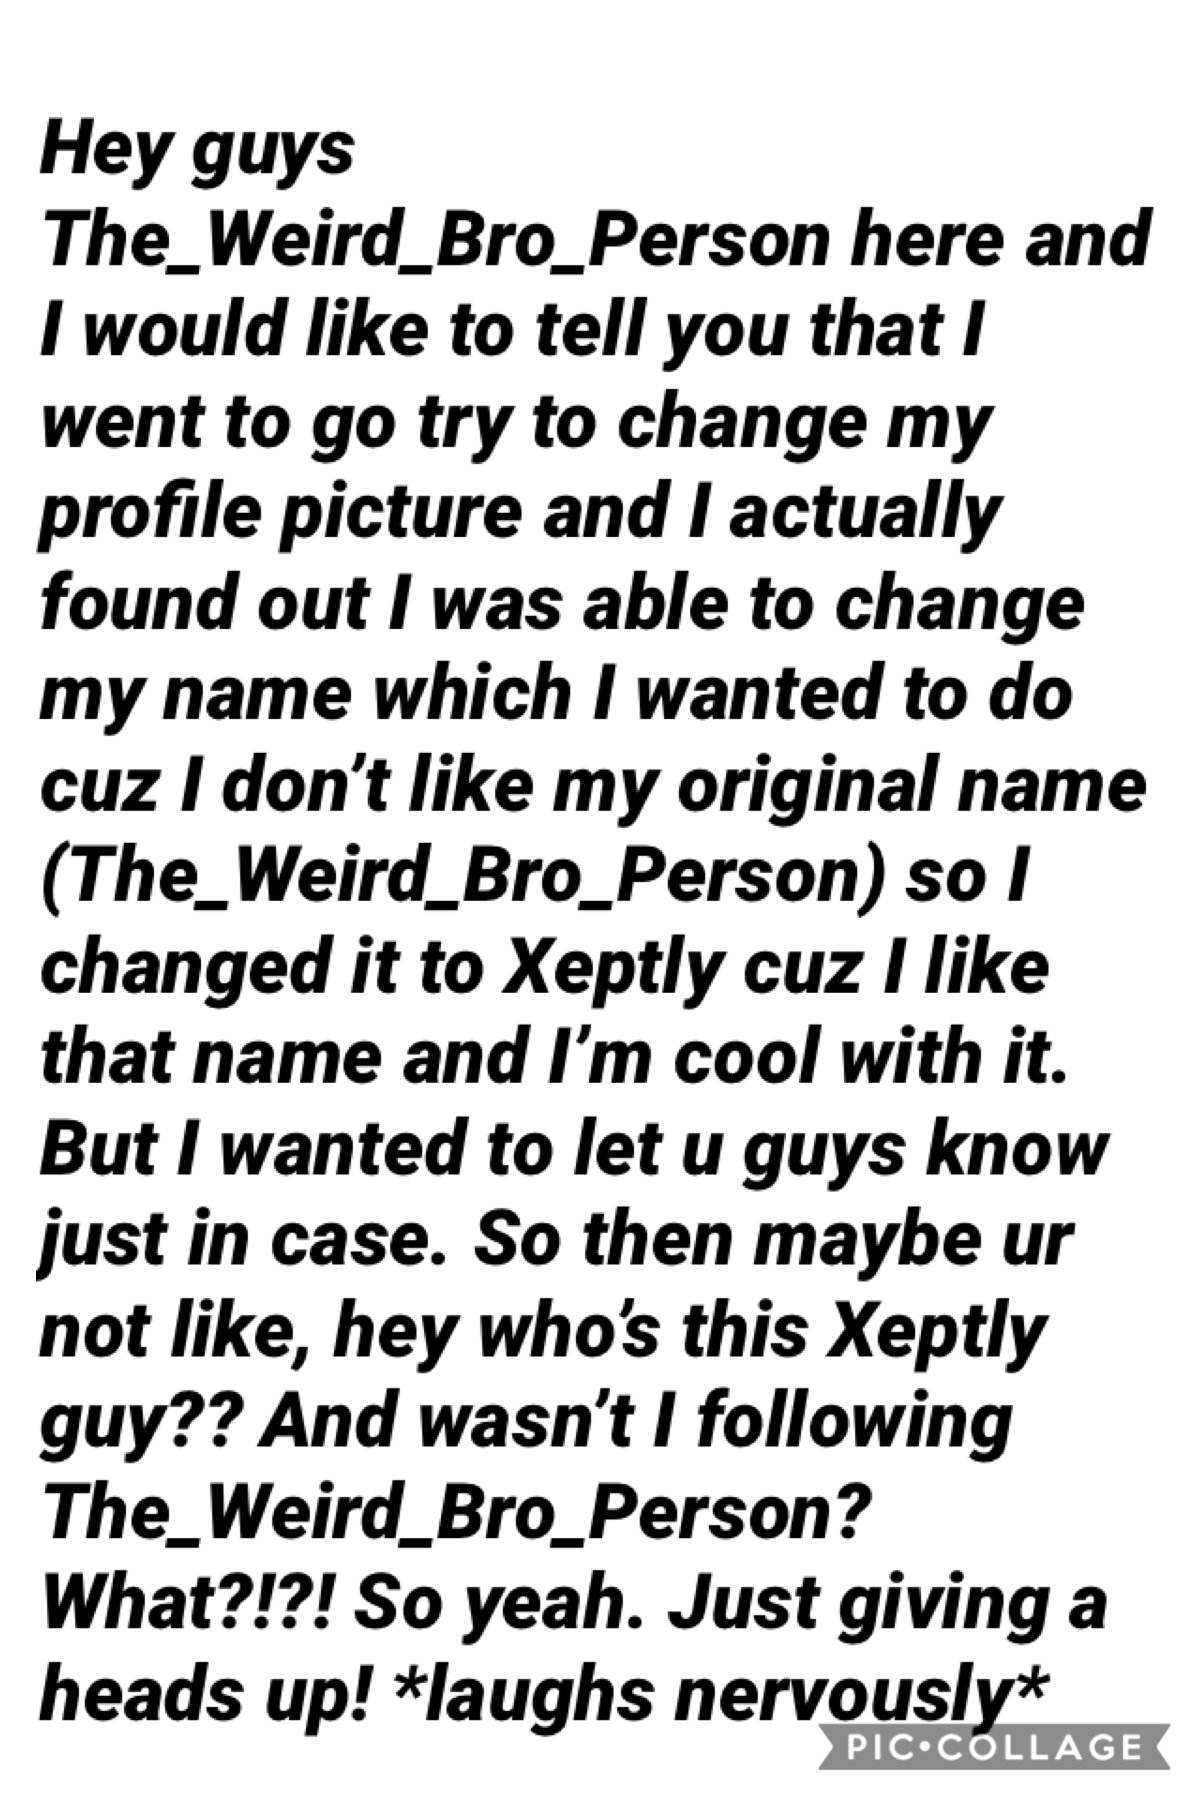 Heads up about me changing my name.